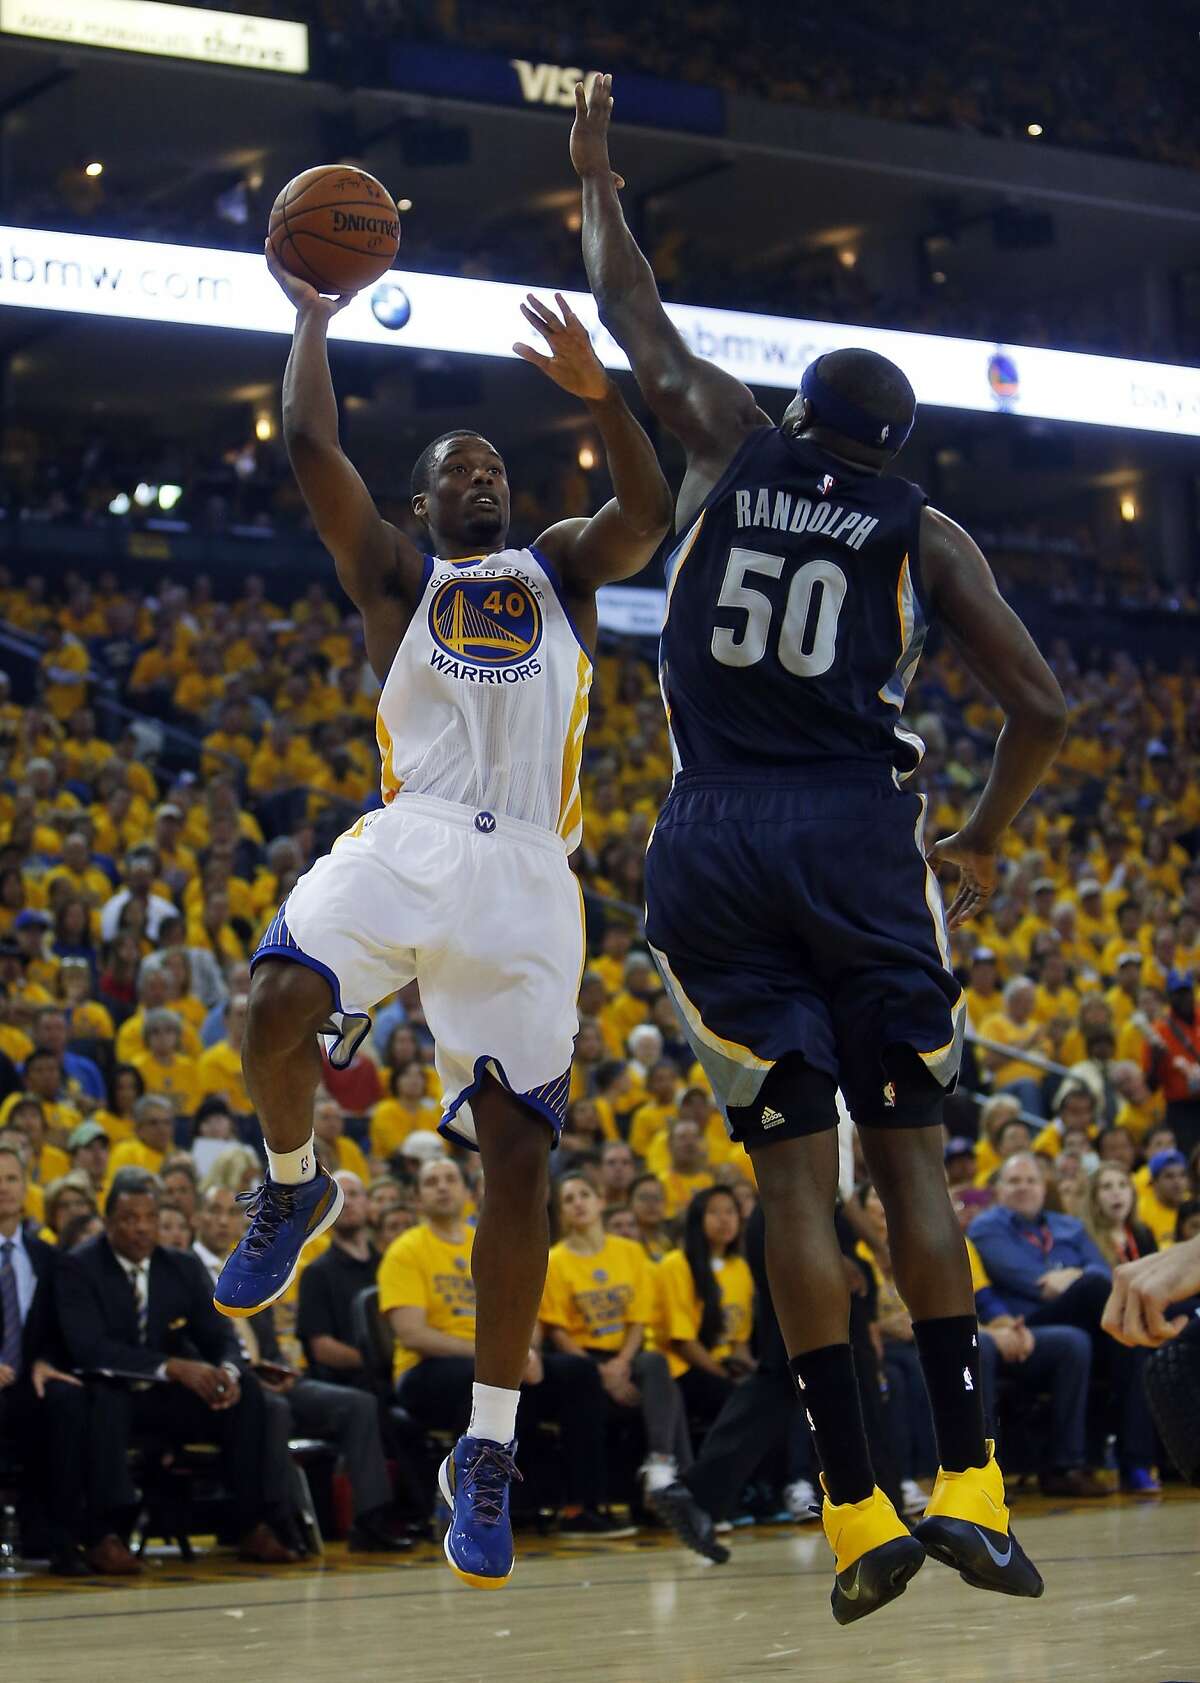 Golden State Warriors' Harrison Barnes scores over Memphis Grizzlies' Zach Randolph in 2nd quarter of Warriors' 101-86 win during Game 1 of NBA Playoffs' Western Conference Semifinals in Oakland, Calif., on Sunday, May 3, 2015.